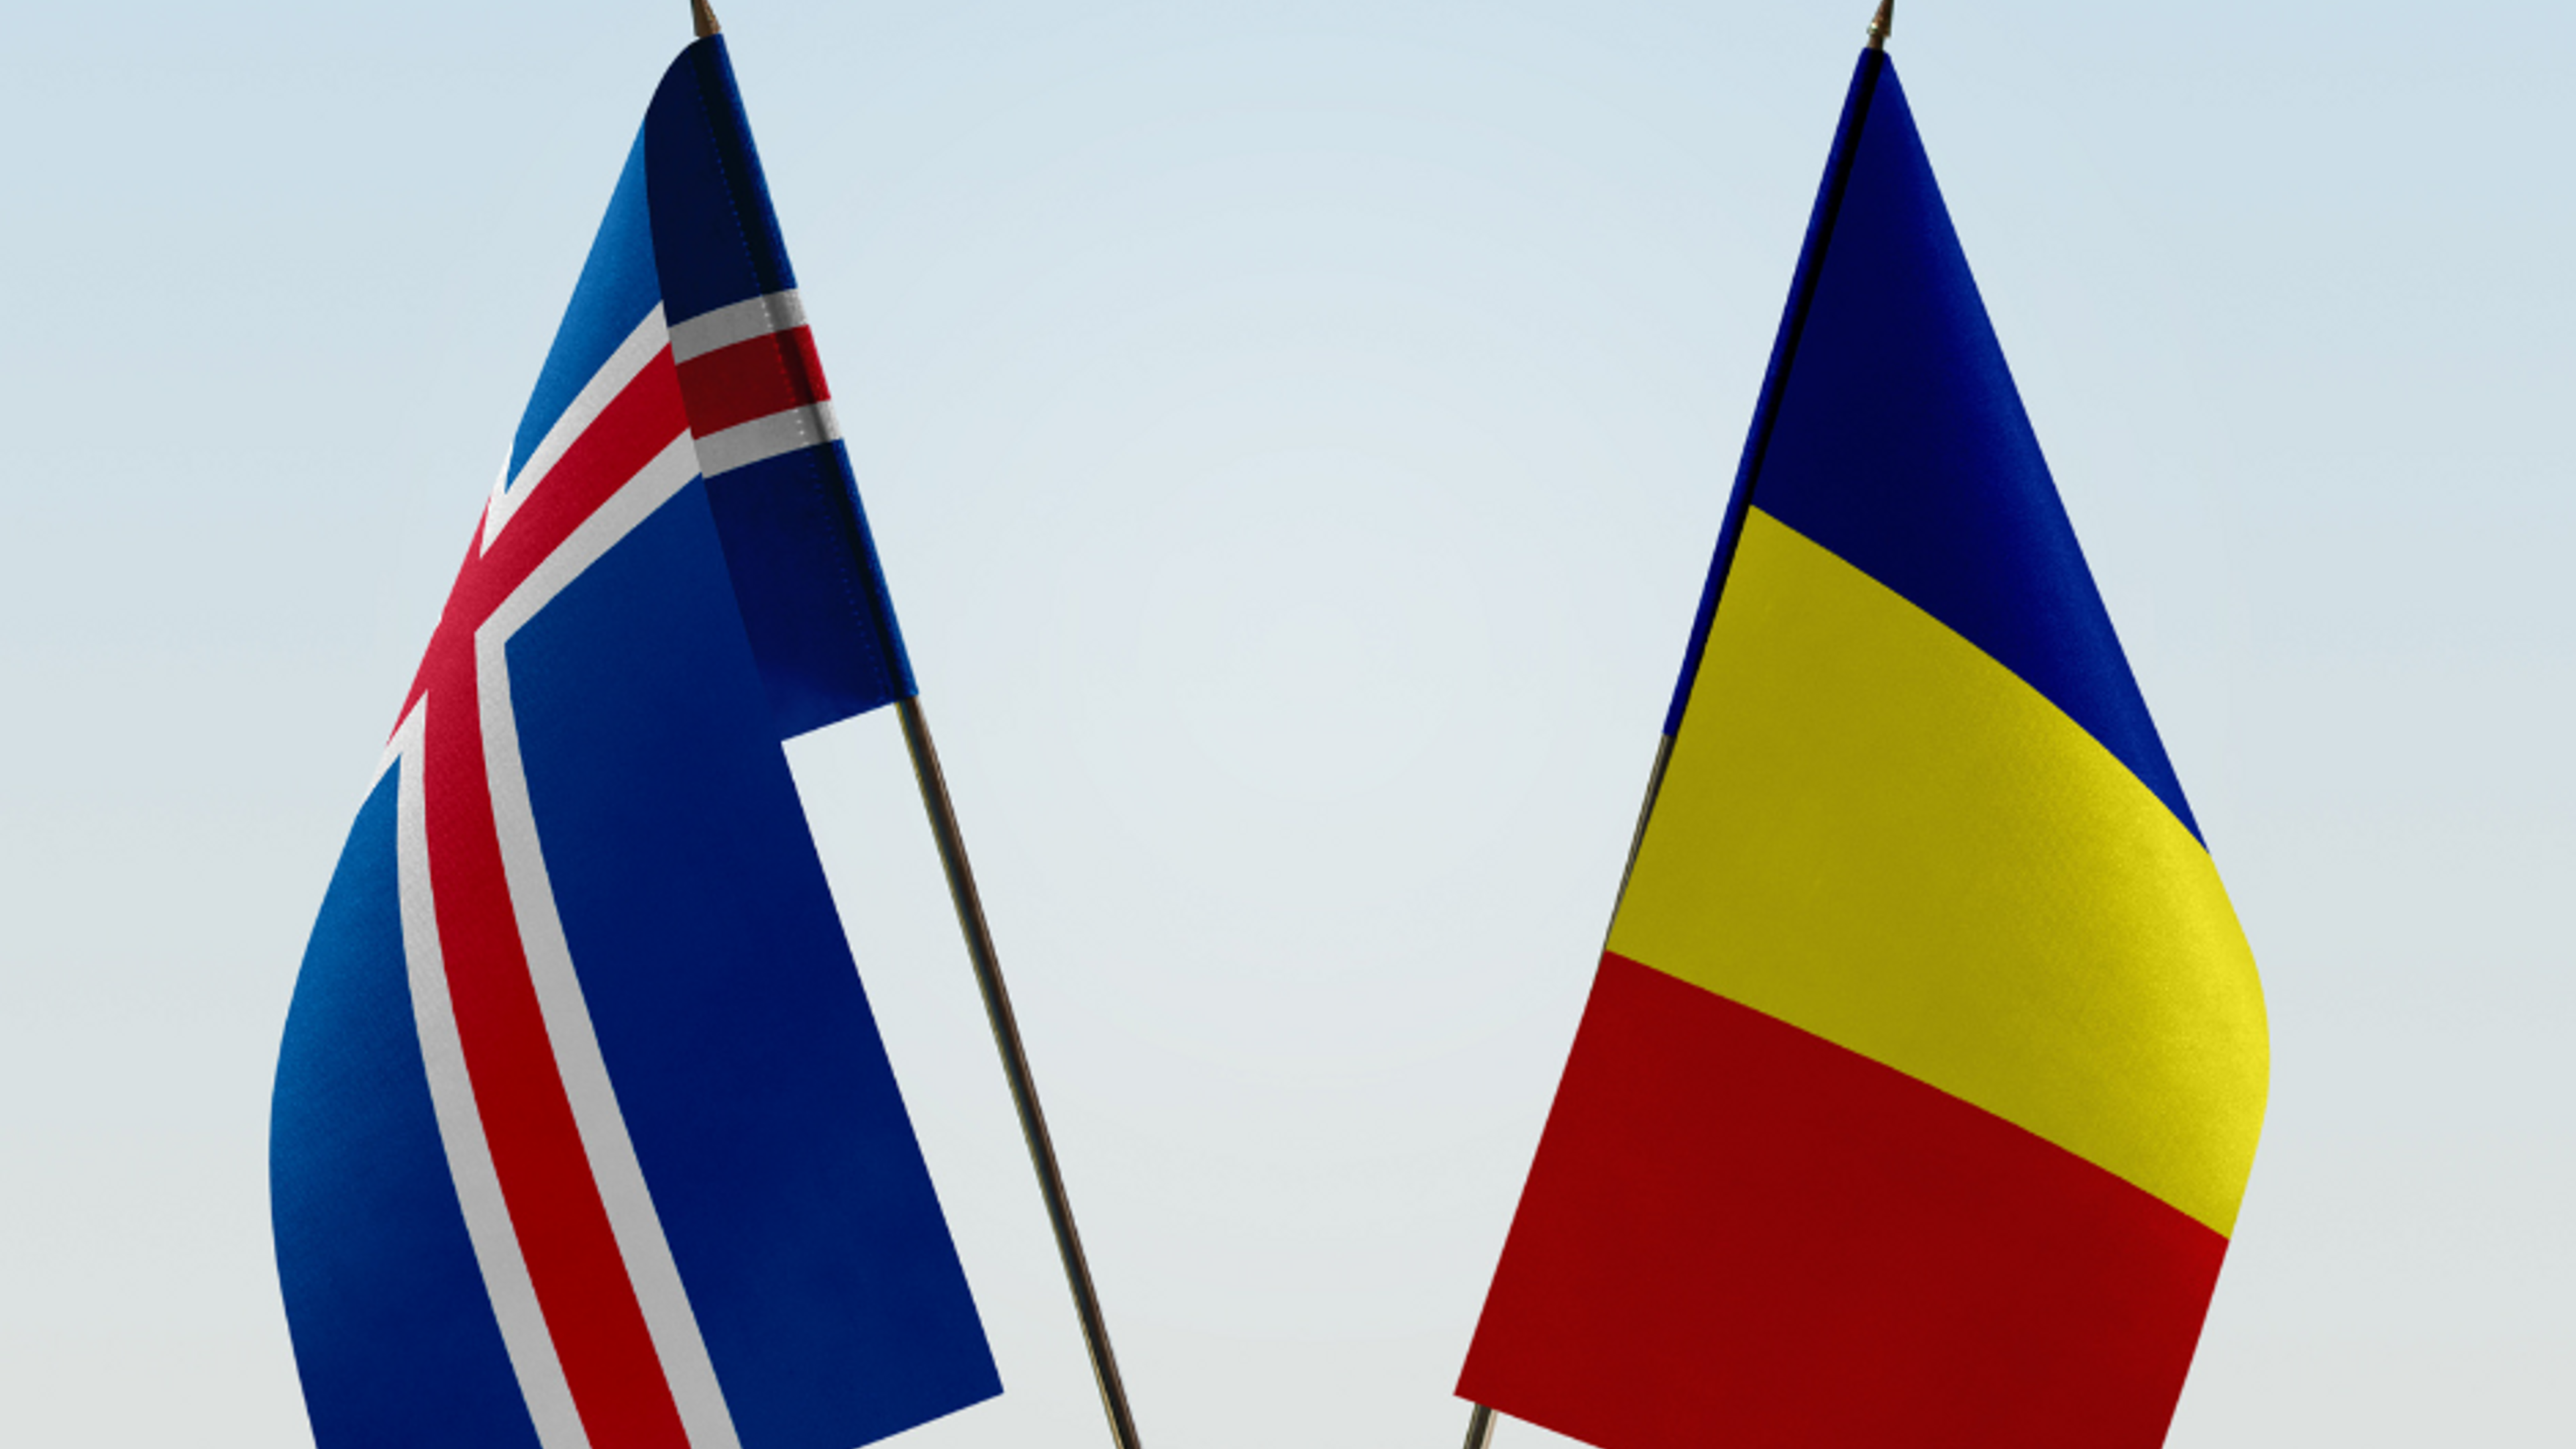 Icelandic and Romanian flags